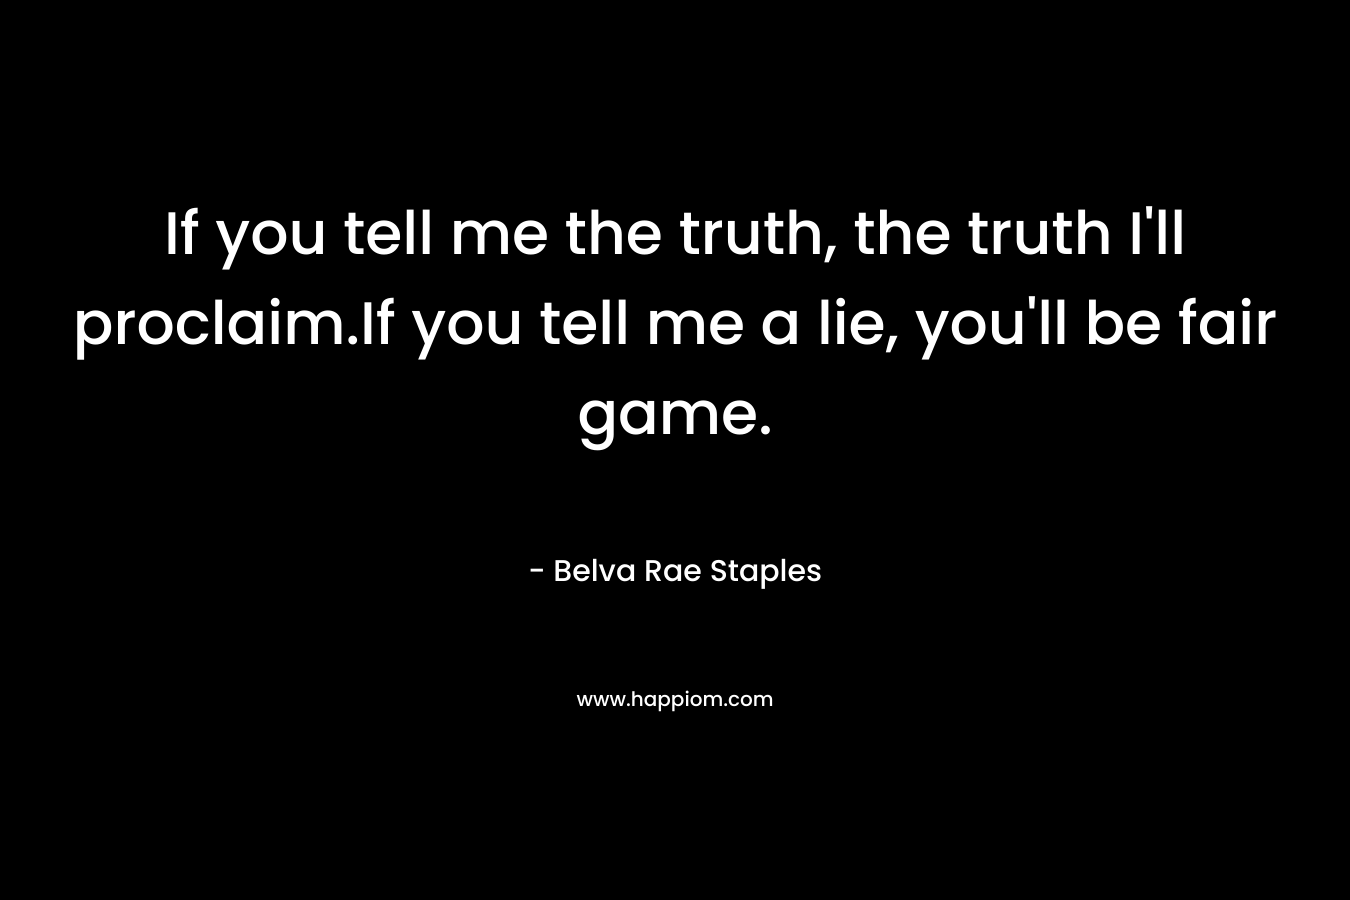 If you tell me the truth, the truth I'll proclaim.If you tell me a lie, you'll be fair game.